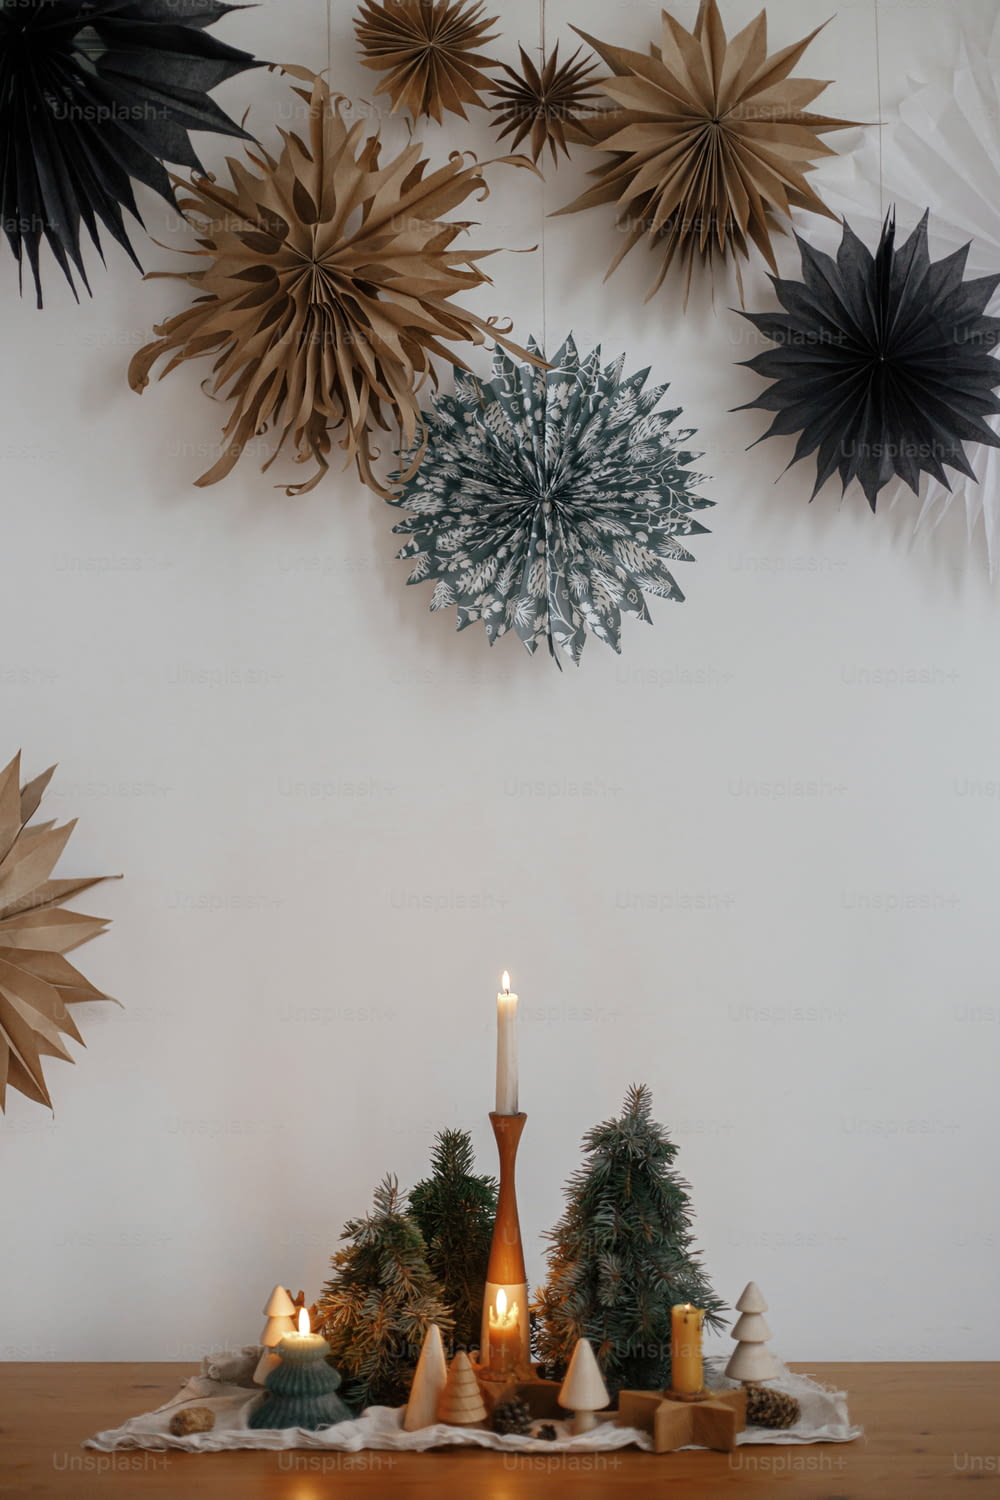 Stylish christmas candles and trees decorations on wooden table on background of white wall with big paper stars. Handmade holiday decor. Atmospheric winter time. Merry Christmas!